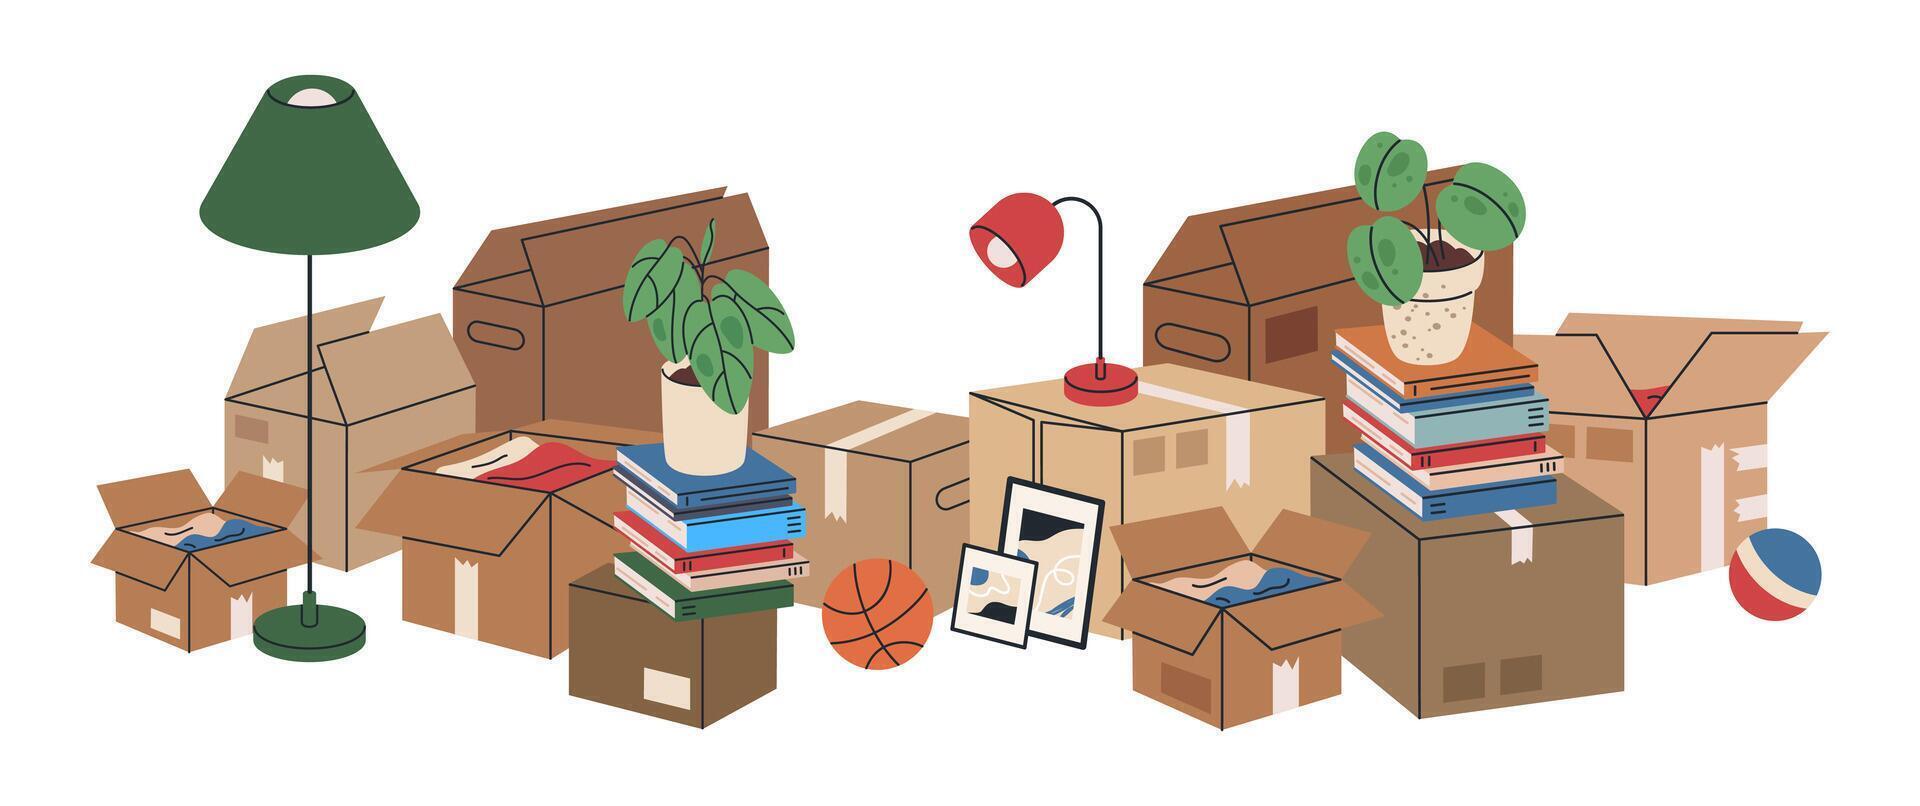 New house moving boxes. Moving stuff in stacked cardboard boxes, carton moving boxes with books, clothes and pot plants flat background illustration. Hand drawn moving boxes vector